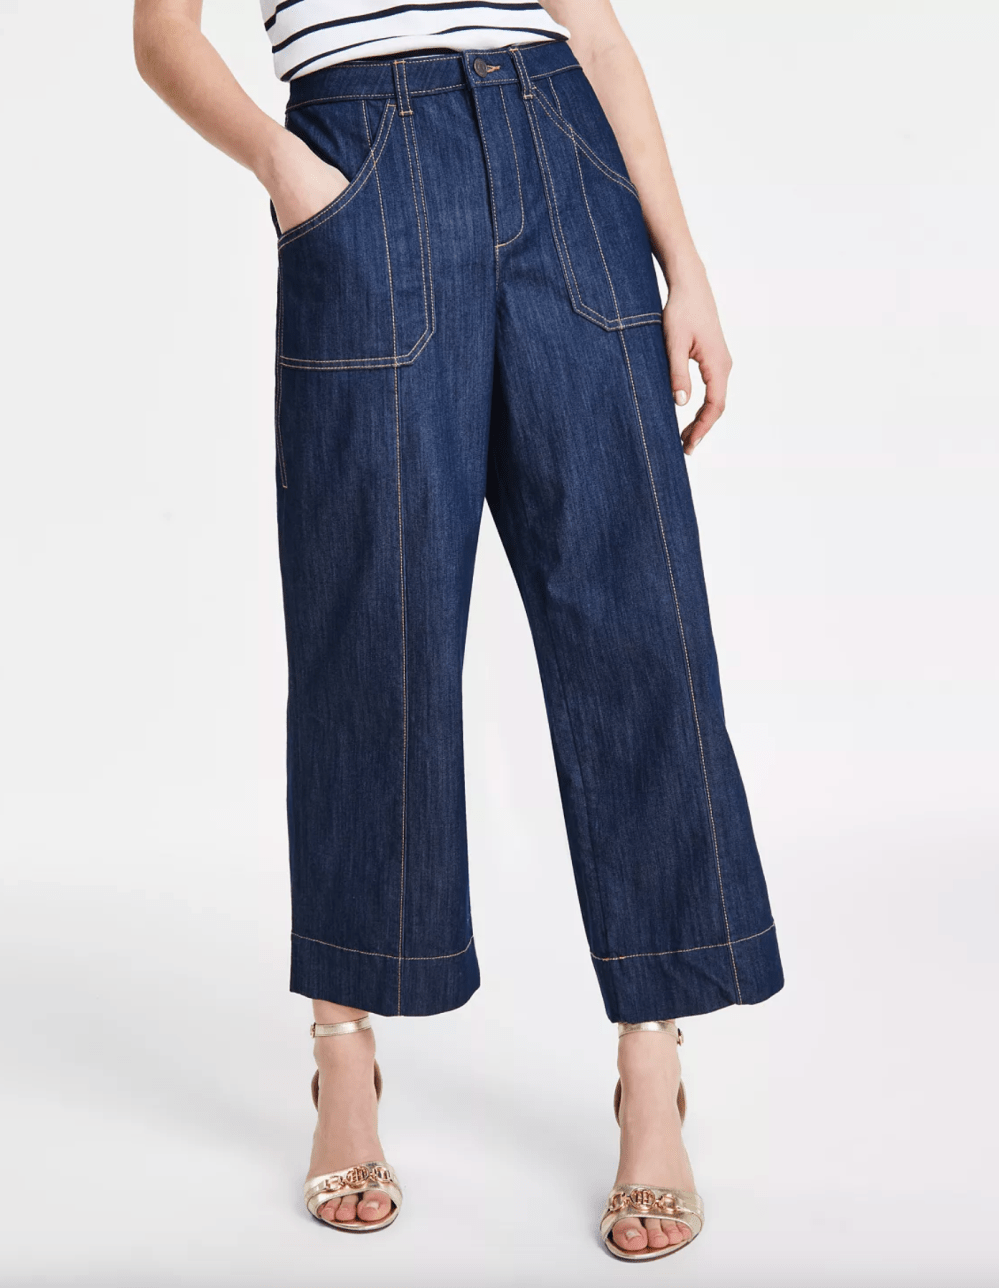 Tommy Hilfiger Women's High-Rise Wide-Leg Ankle Jeans